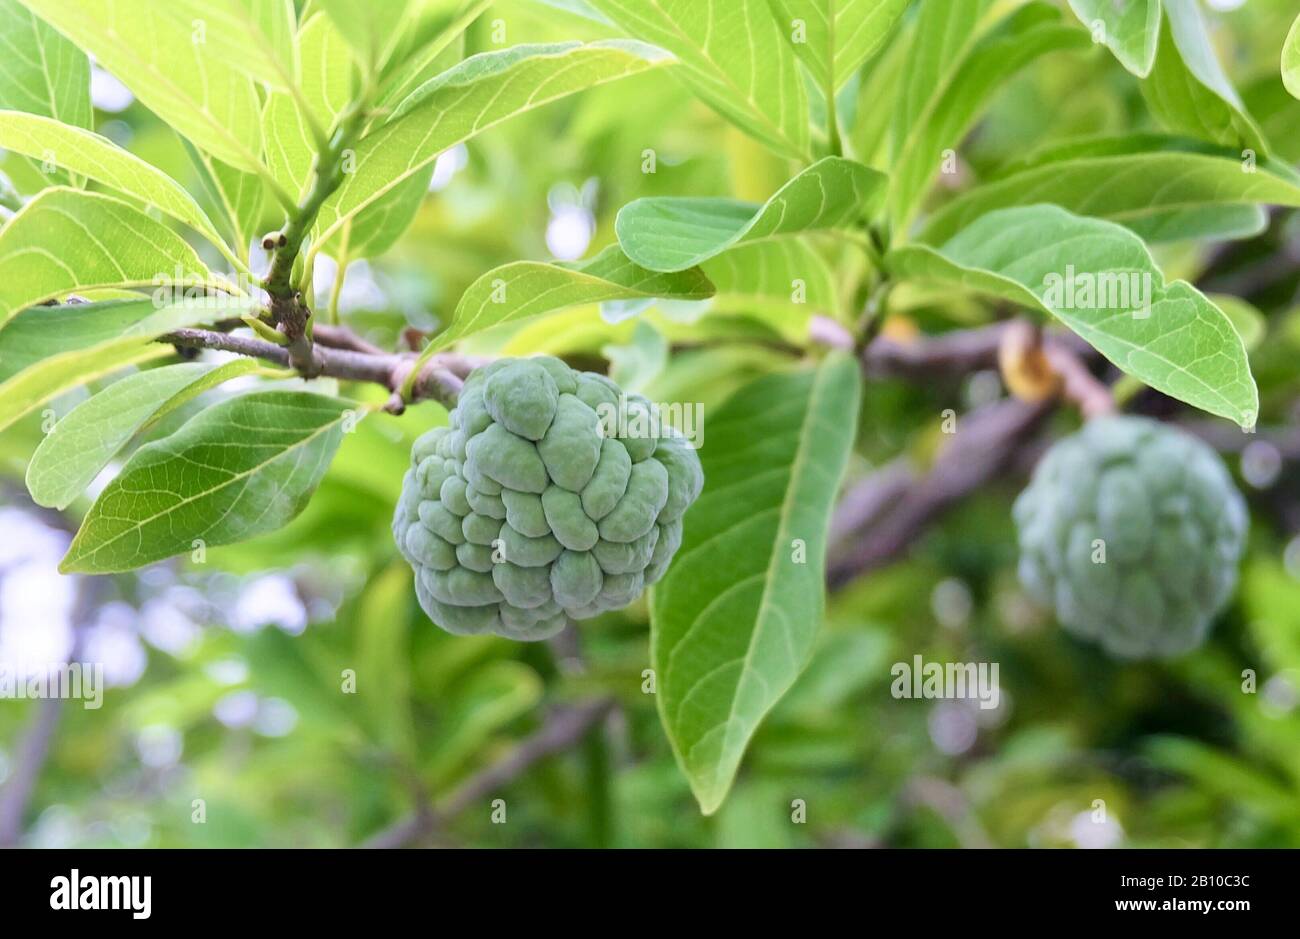 Tropical Fruit, Custard Apple, Sugar-Apple, Sweetsop or Annona Reticulata Fruits on Tree Branches. Stock Photo